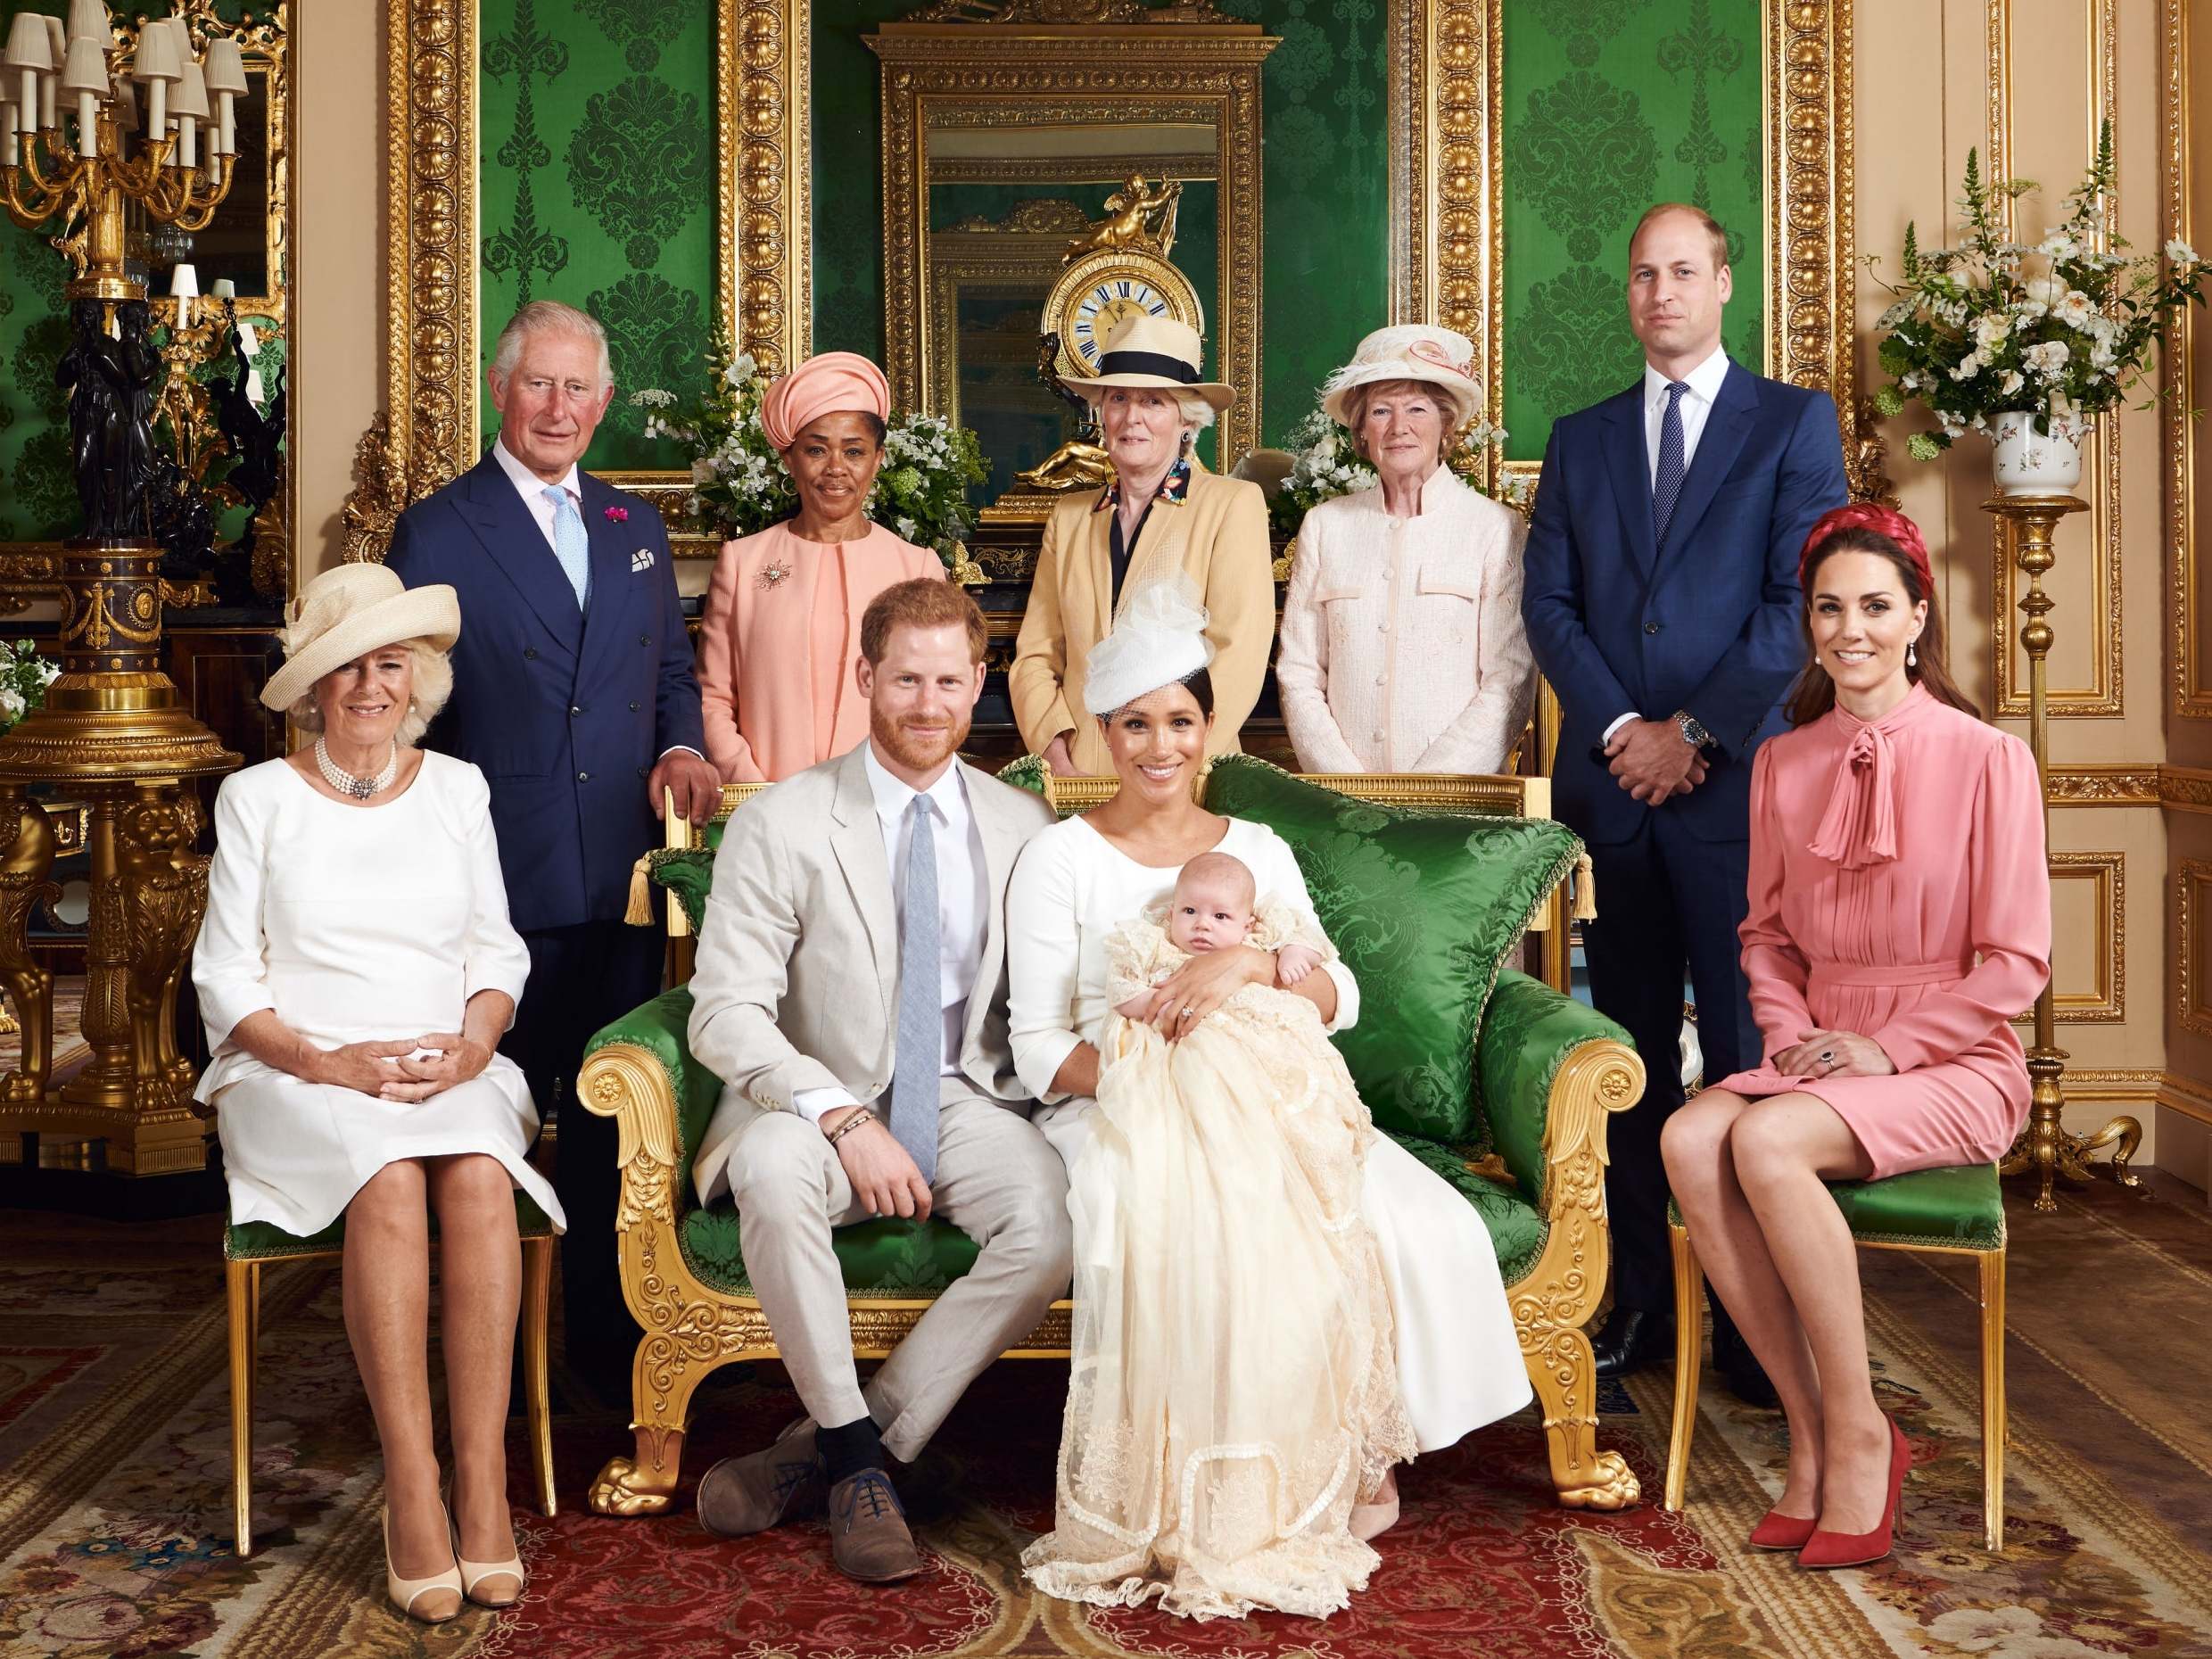 The Duke and Duchess of Cambridge with family in the Green Drawing Room at Windsor Castle.